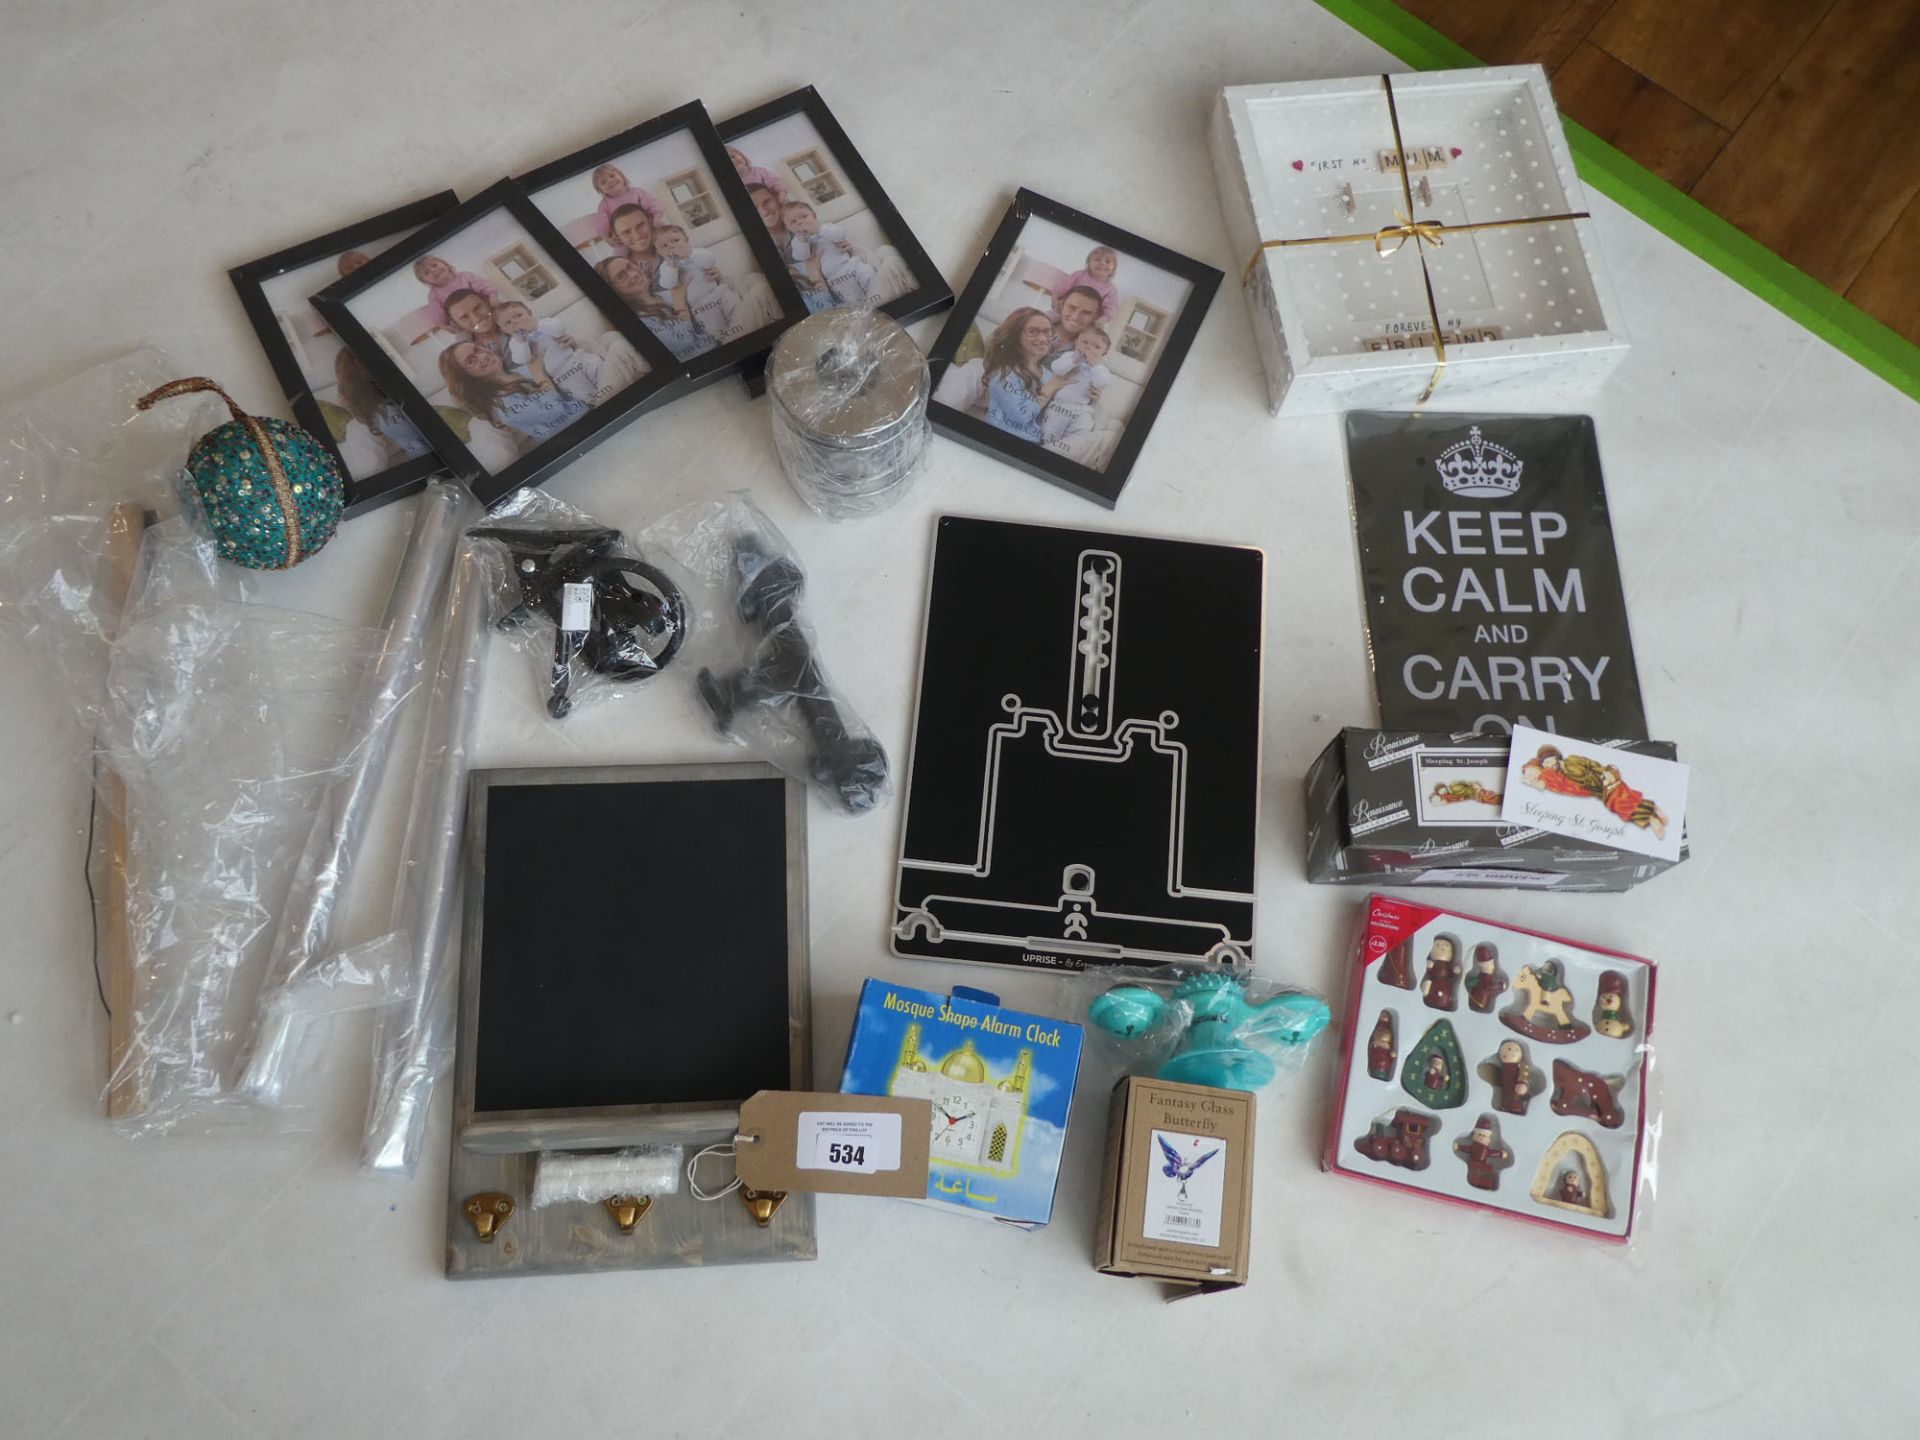 Selection of items including photo frames, chalkboard, sleeping St Joseph, glass butterfly etc